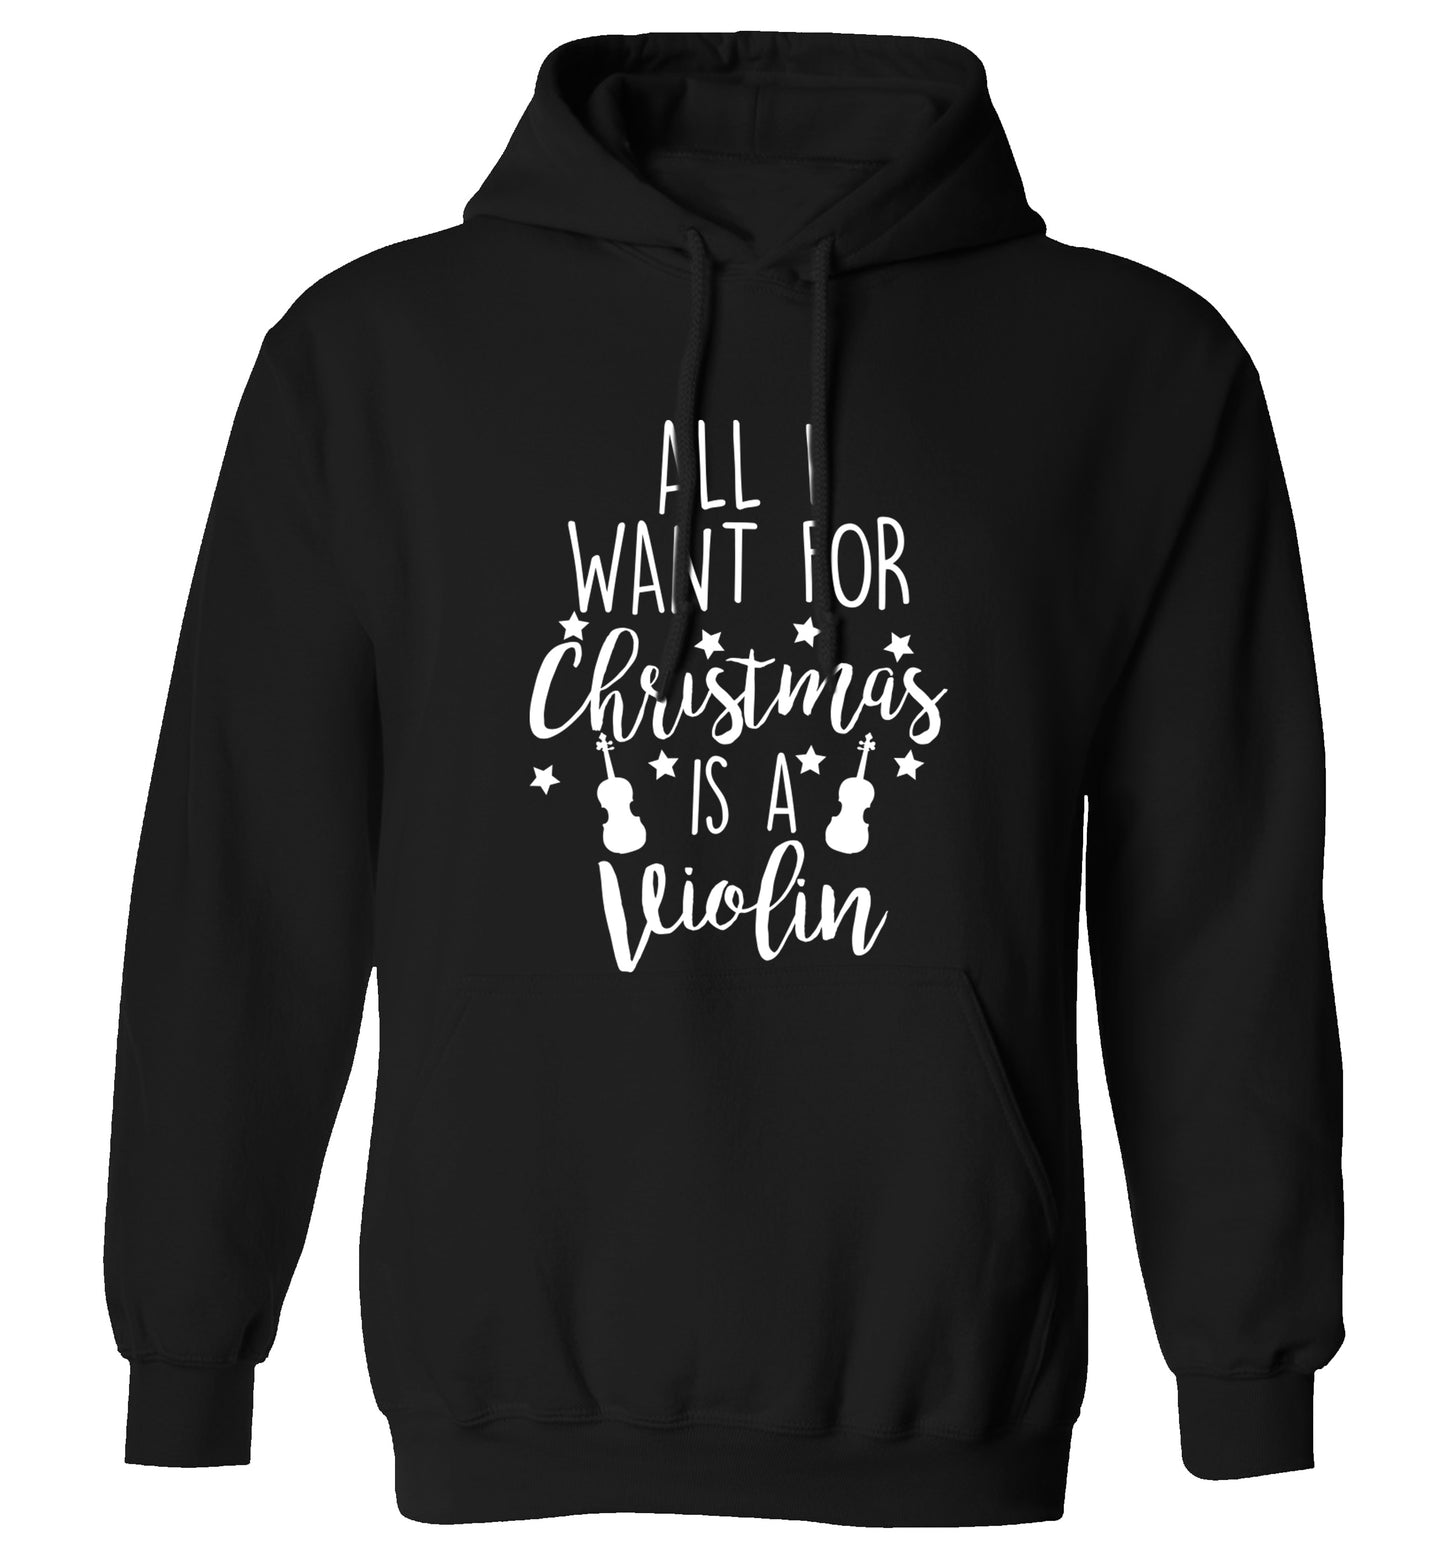 All I Want For Christmas is a Violin adults unisex black hoodie 2XL